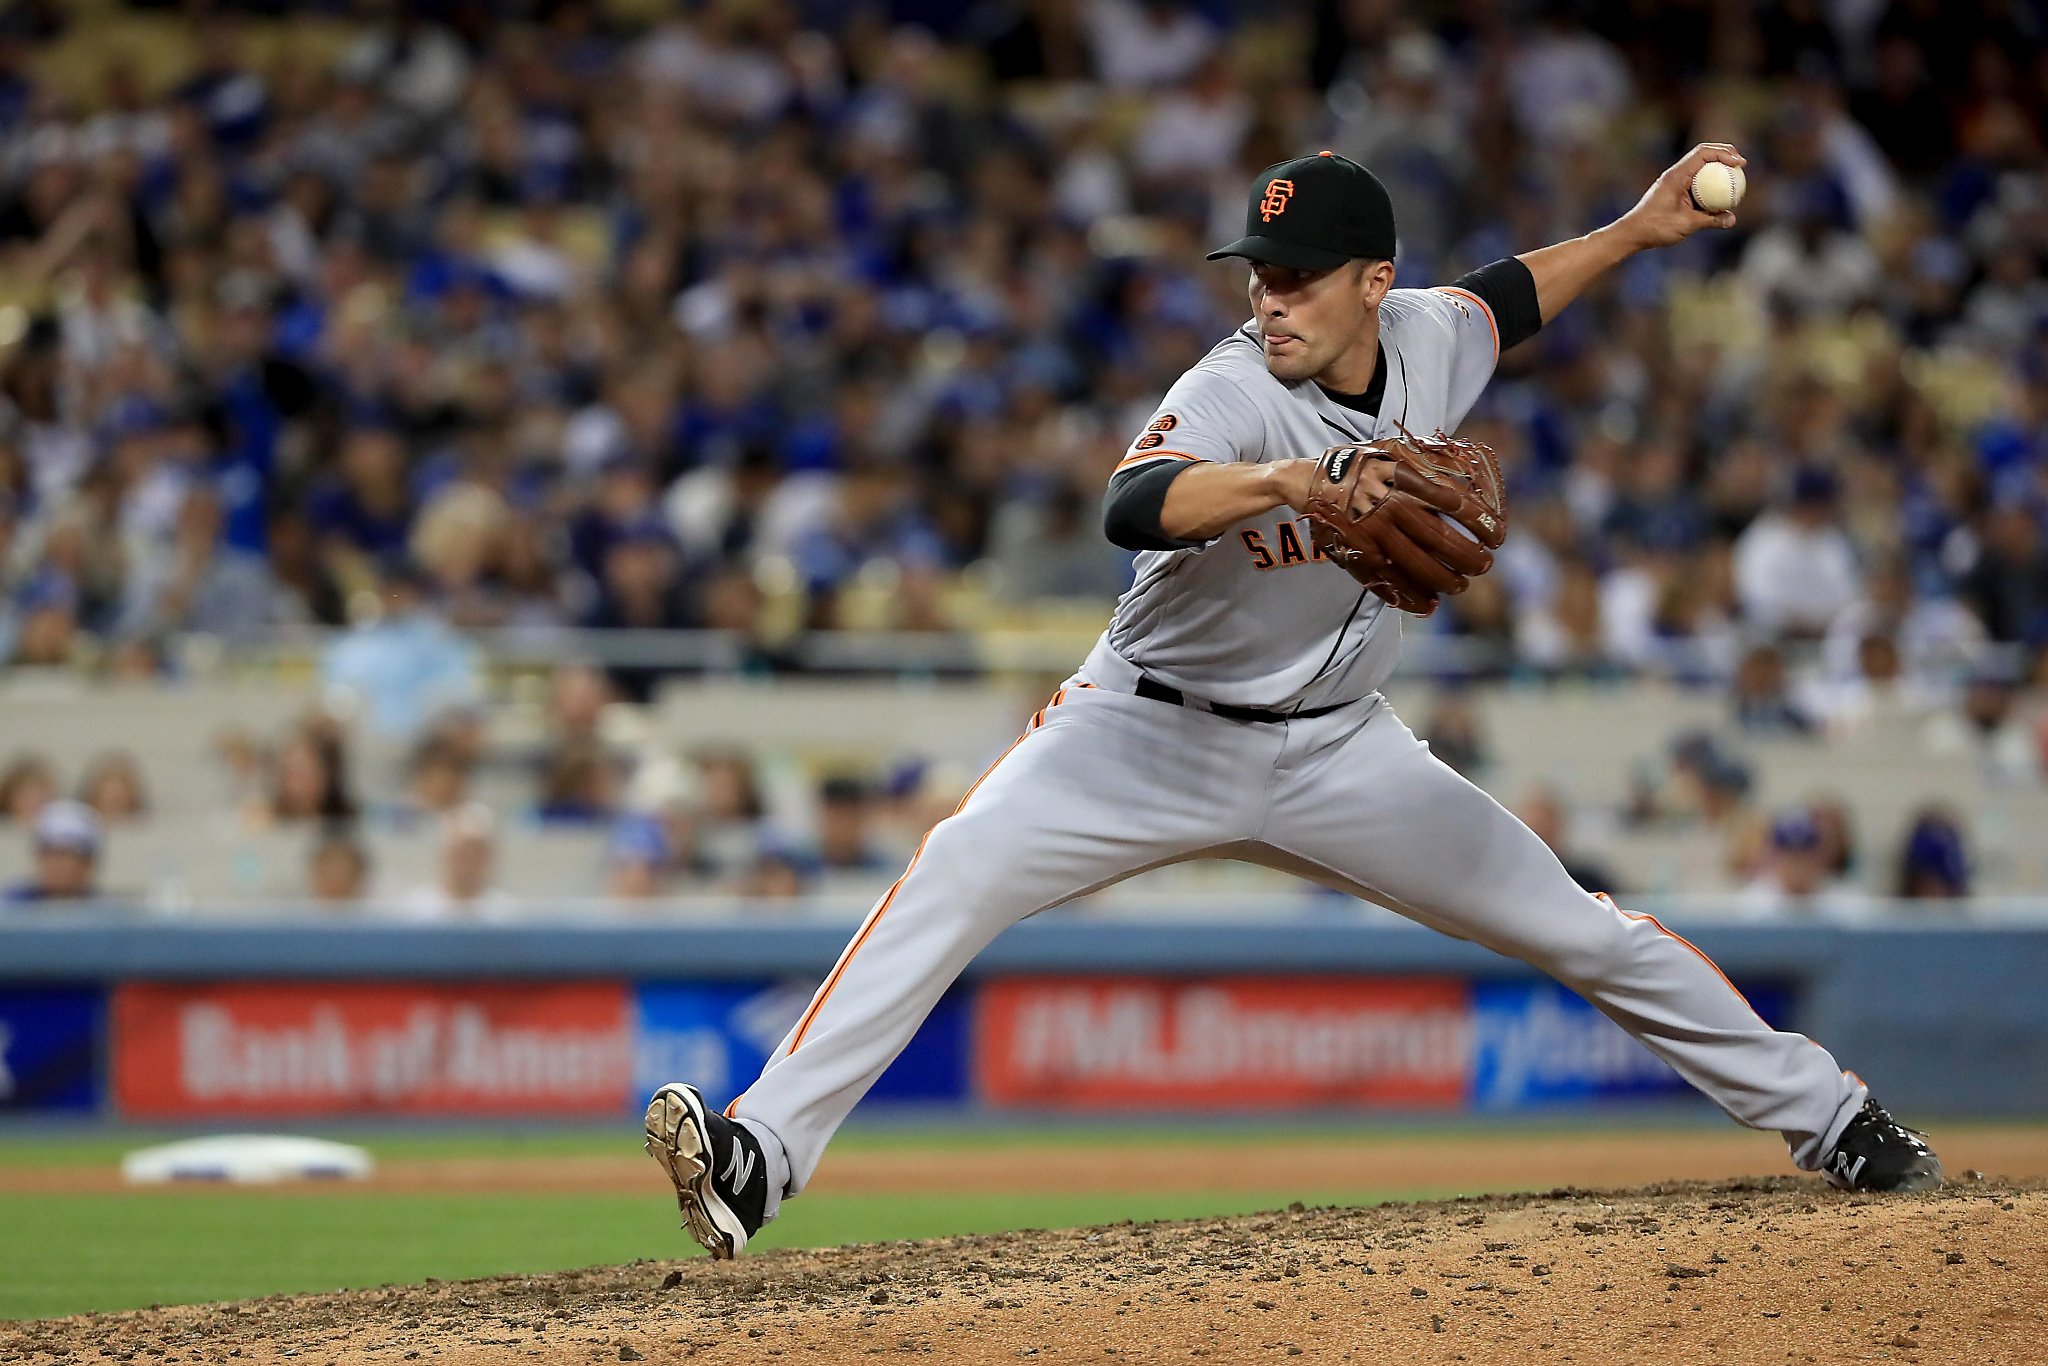 Giants beat: Javier Lopez focused on fastball command